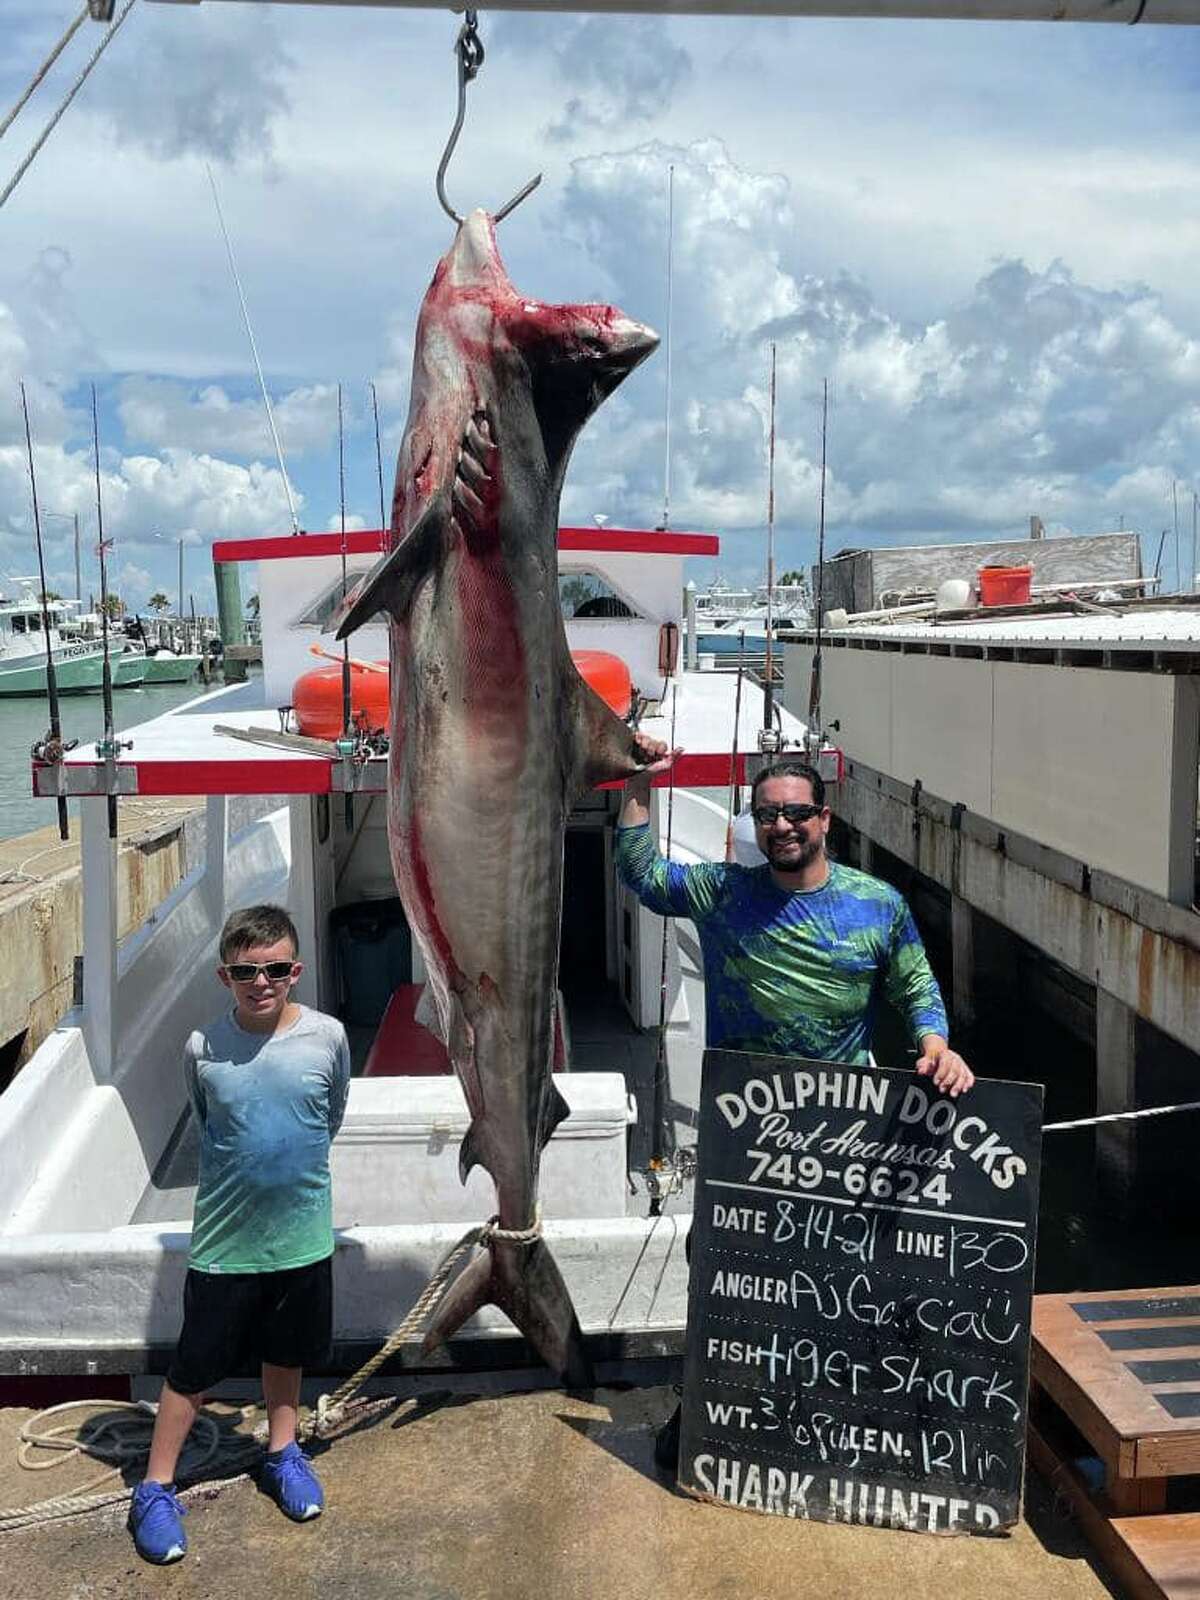 Dolphin Docks Deep Sea Fishing tells MySA.com Aj and Jacob Garcia from San Antonio caught a 10-foot, 368-pound tiger shark while out fishing on a four-hour trip in Port Aransas on Saturday.